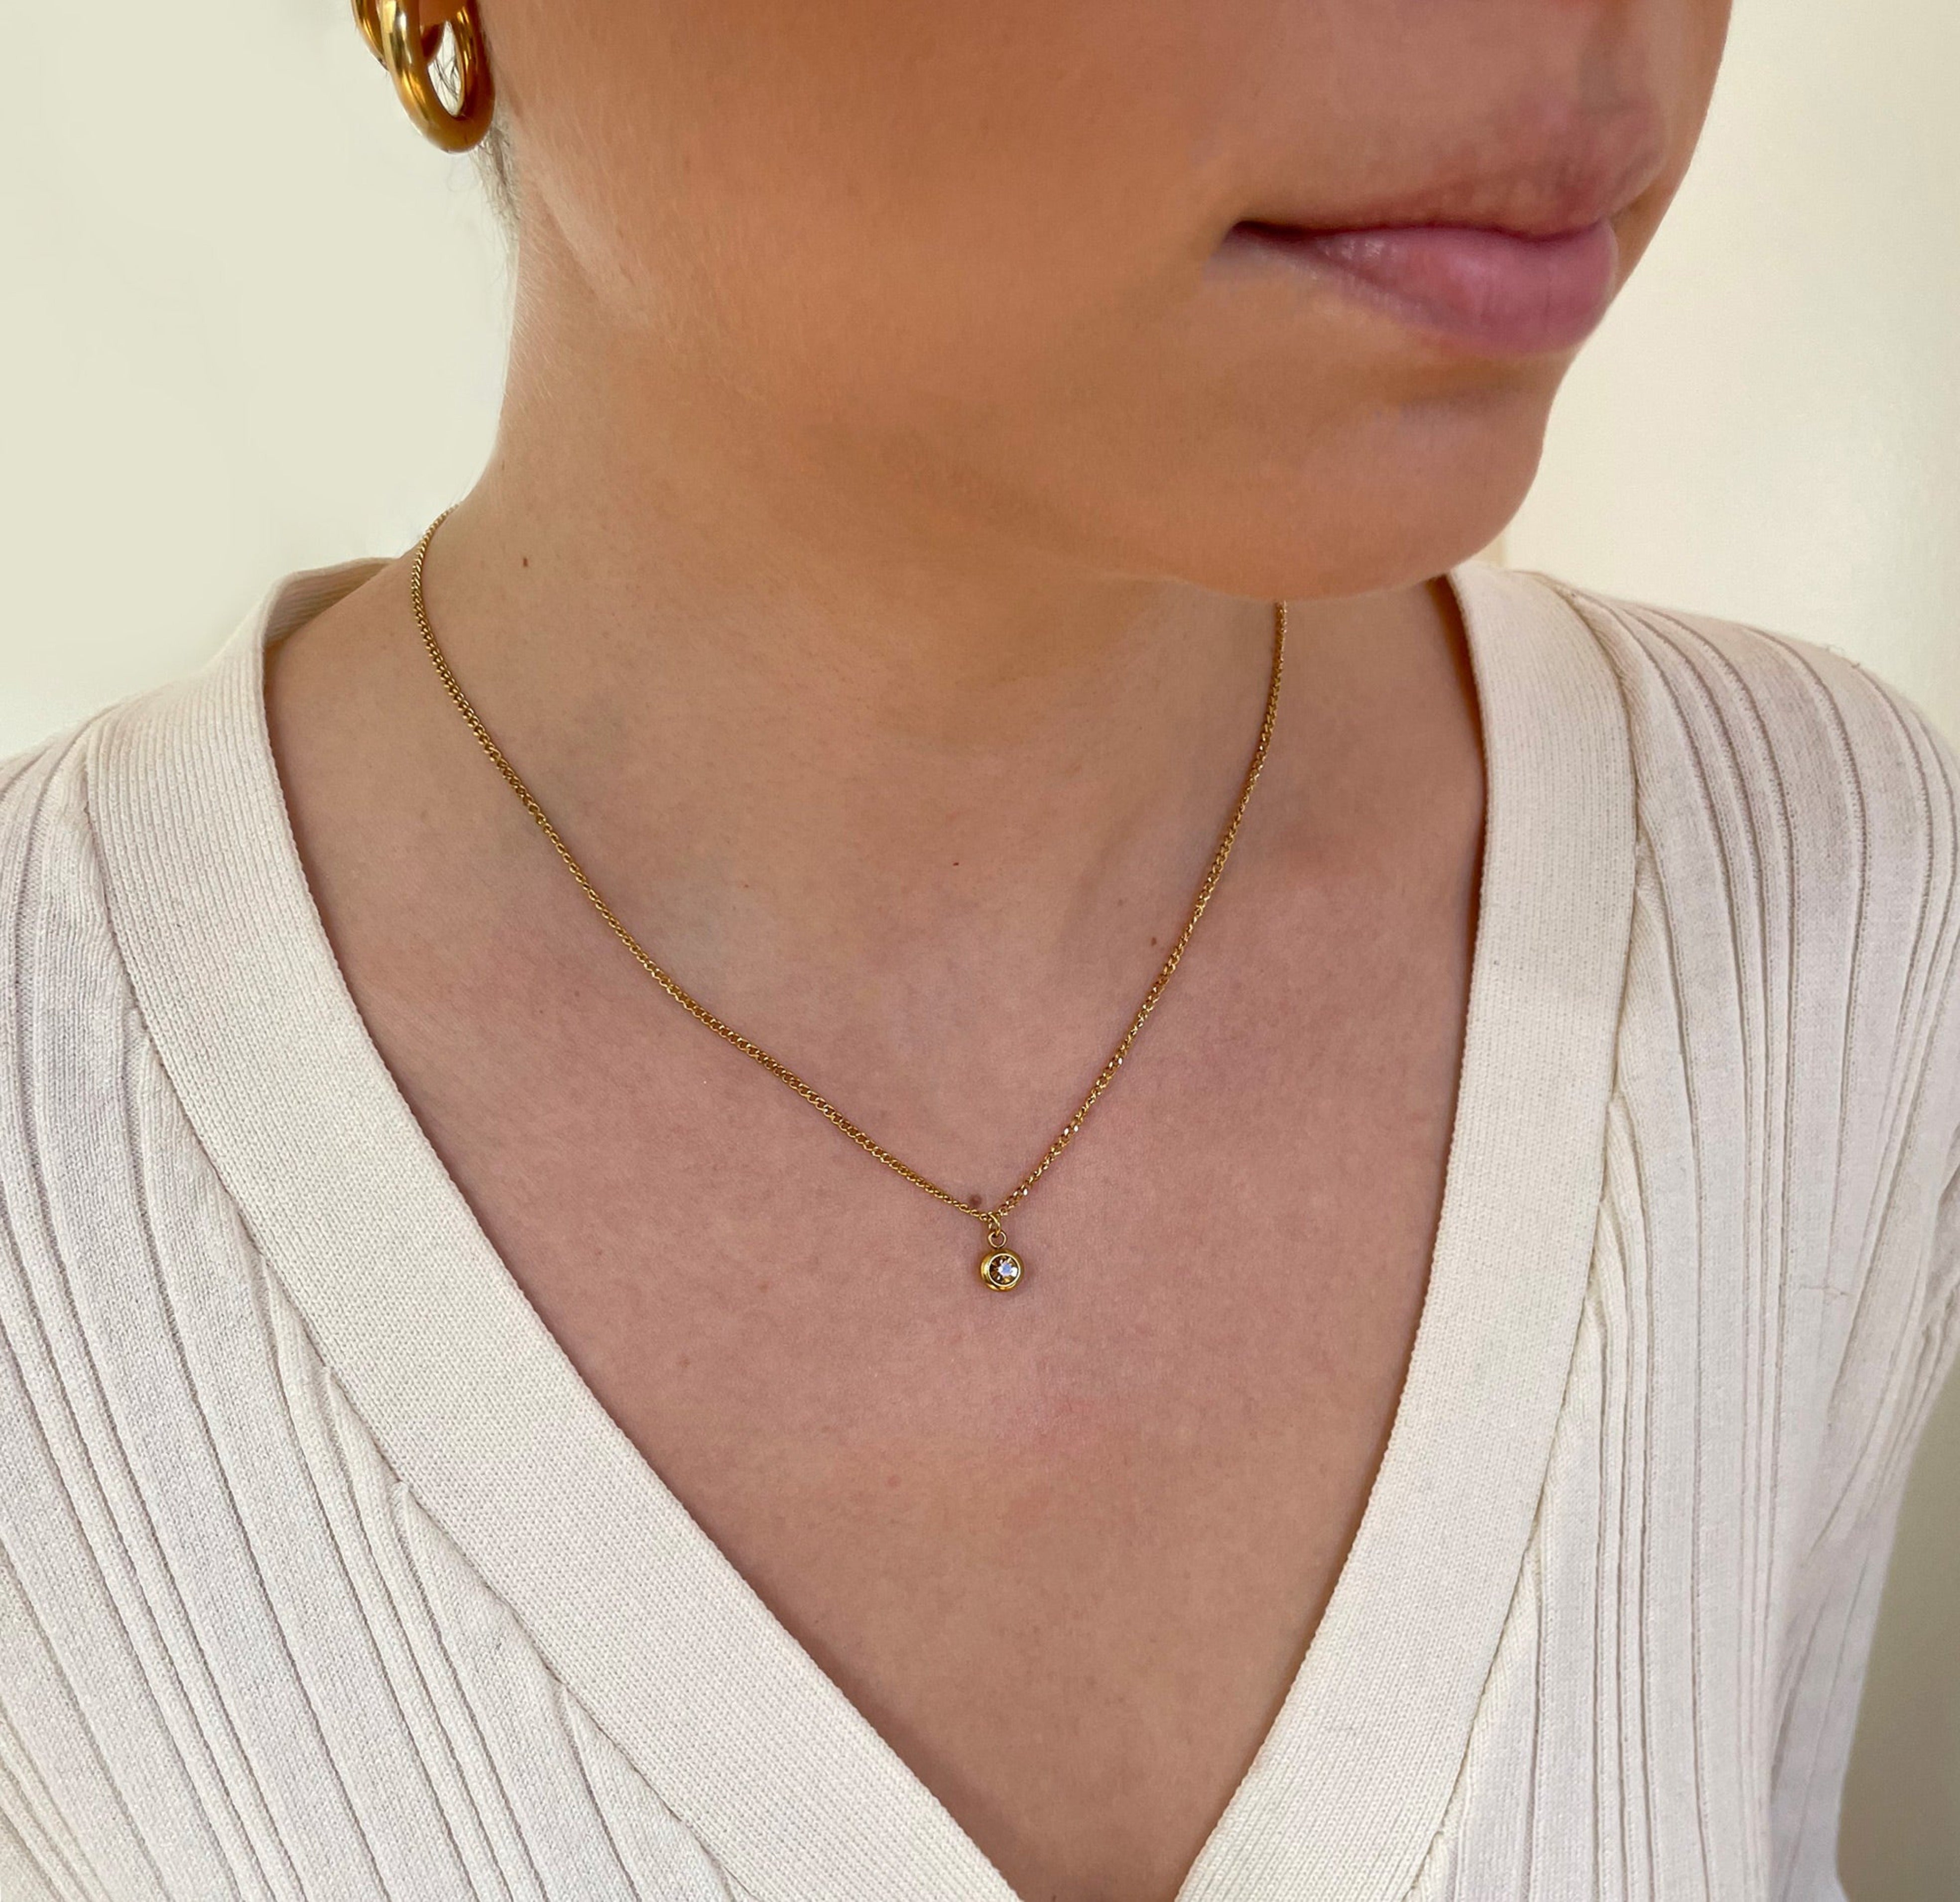 GOLD DAINTY PENDANT NECKLACE